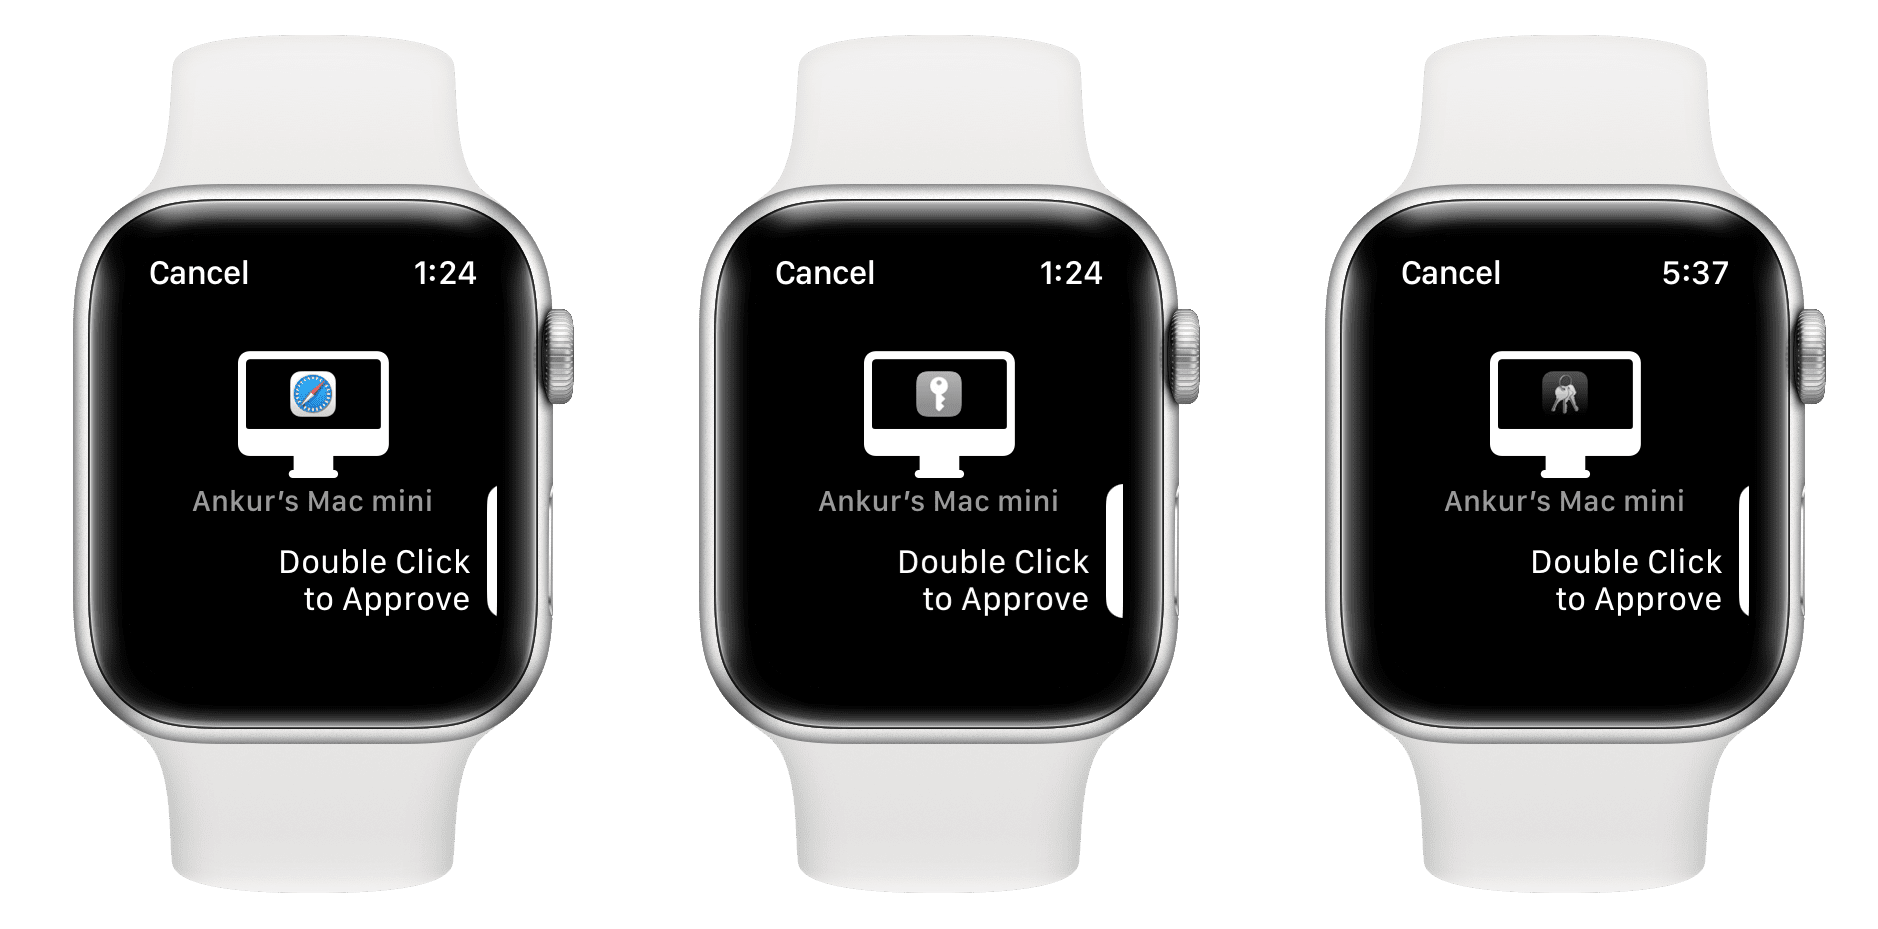 Apple Watch approving requests on Mac